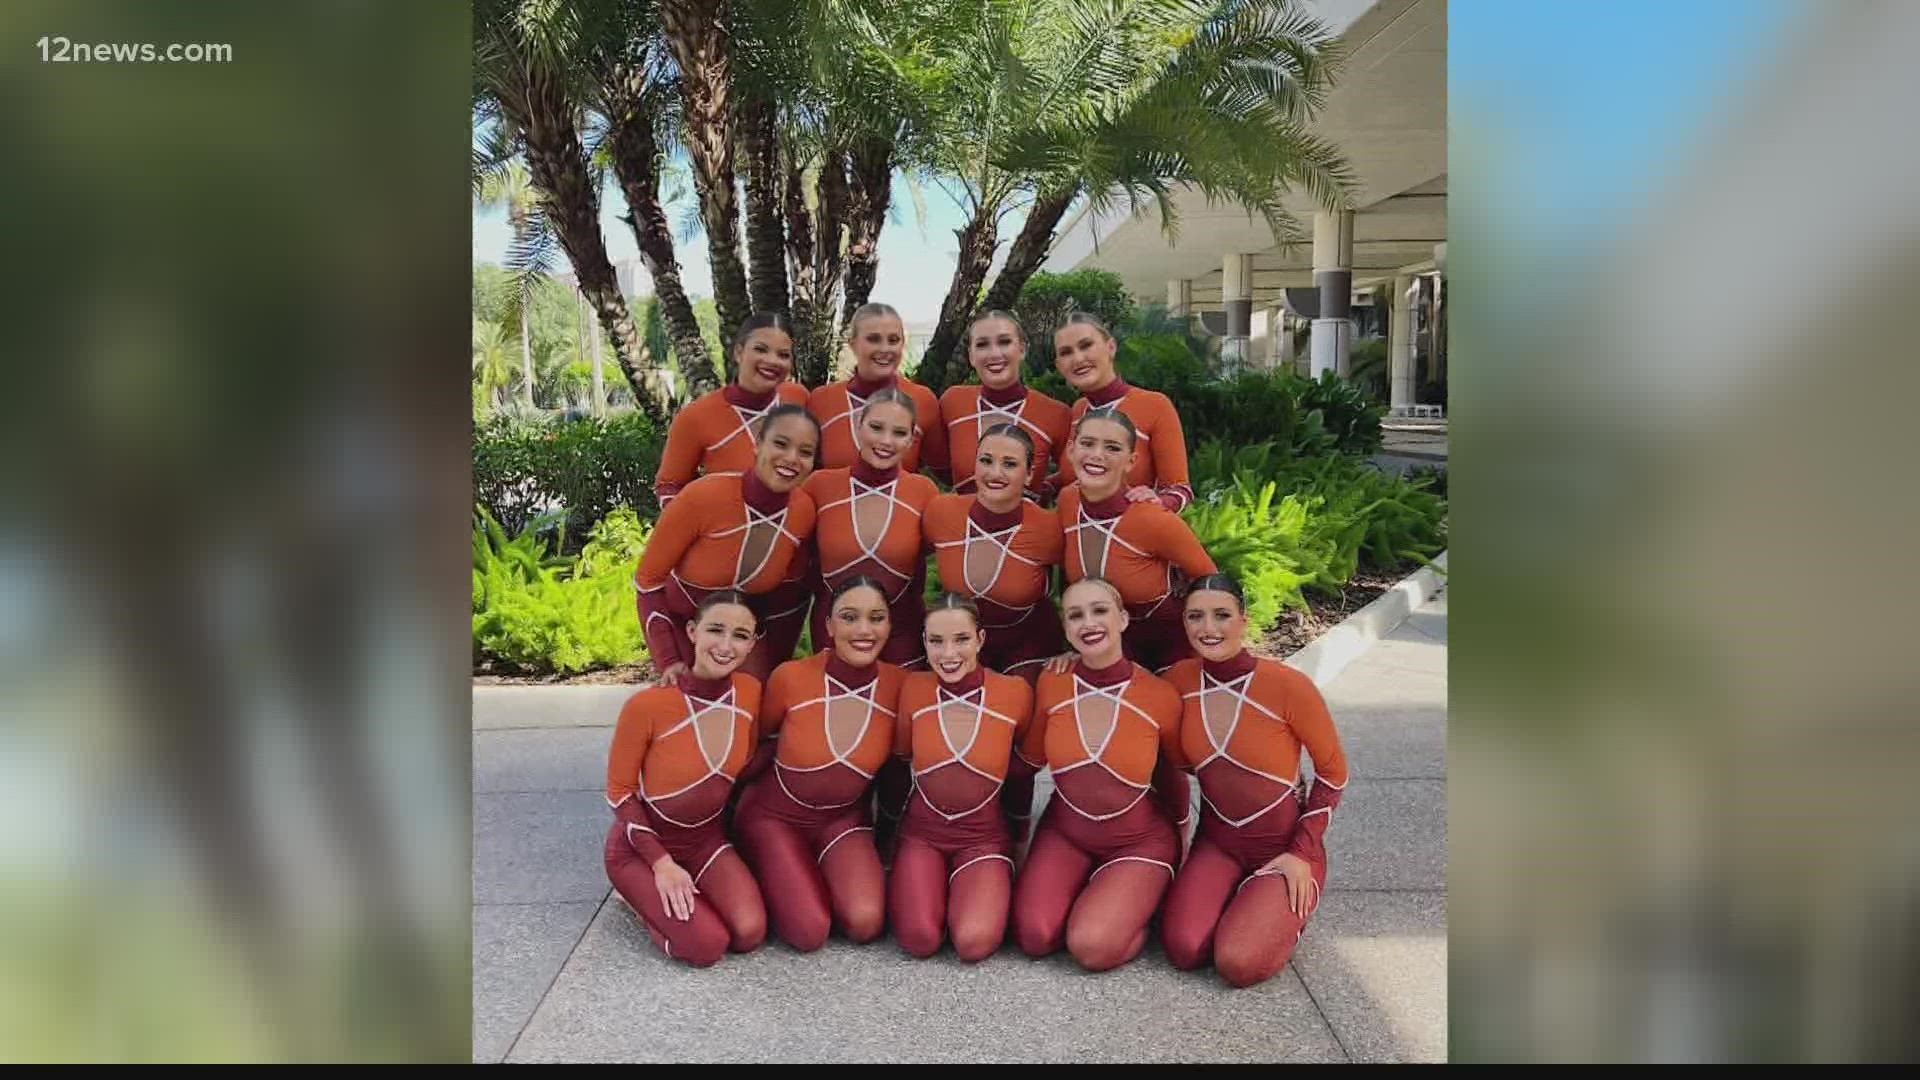 ASU Dance team are National Champions